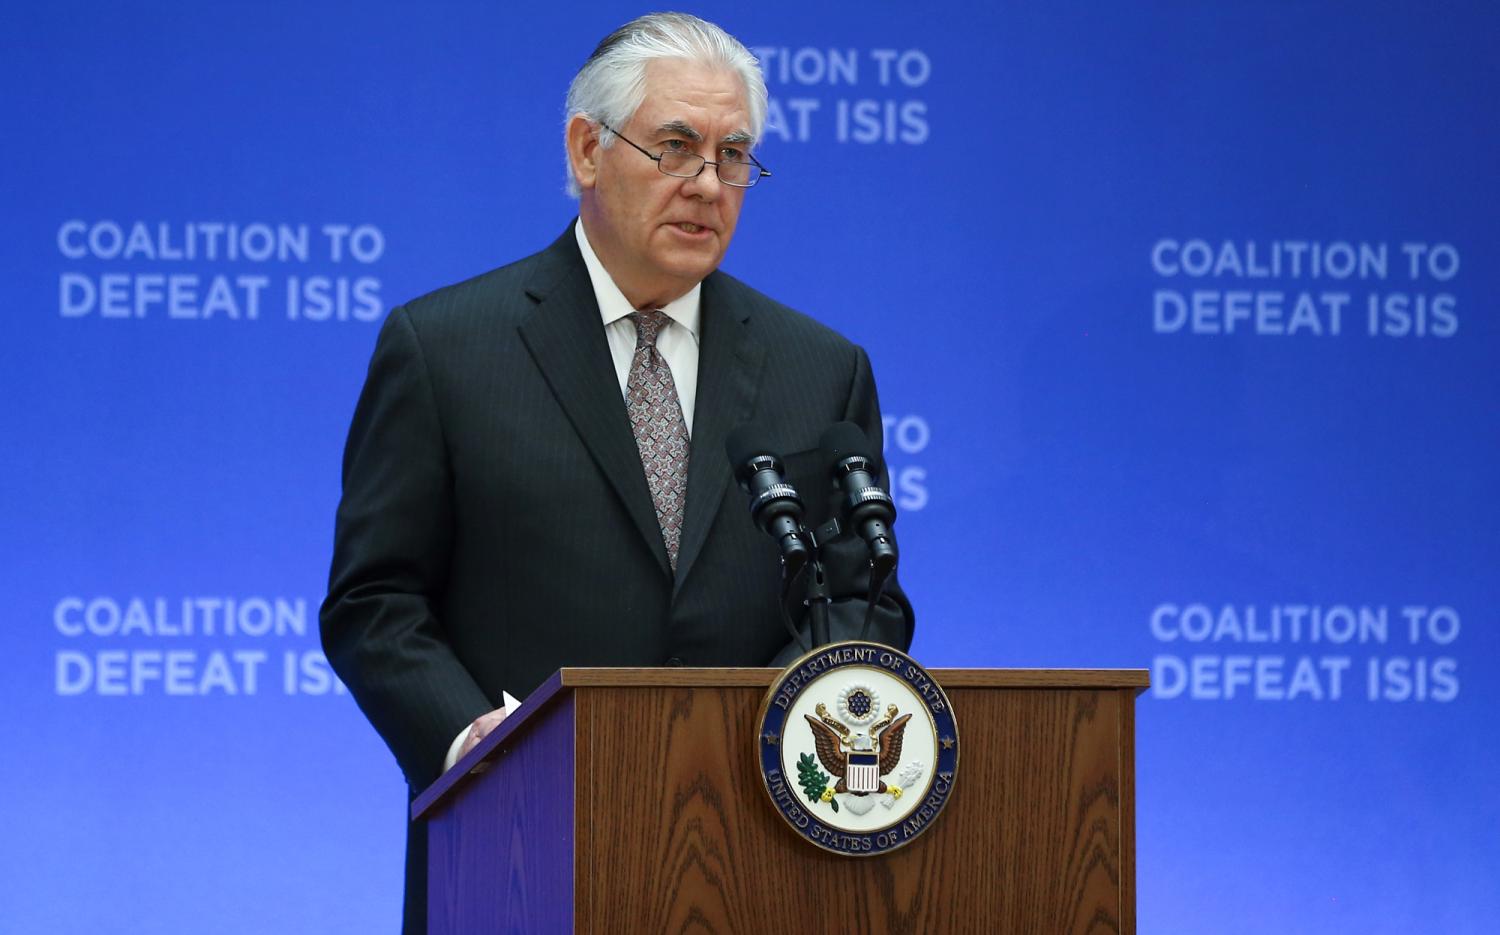 The US Secretary of State Rex Tillerson during the meeting of the coalition to defeat of ISIS in Washington. Photo: Cem Ozdel/Anadolu Agency/Getty Images 